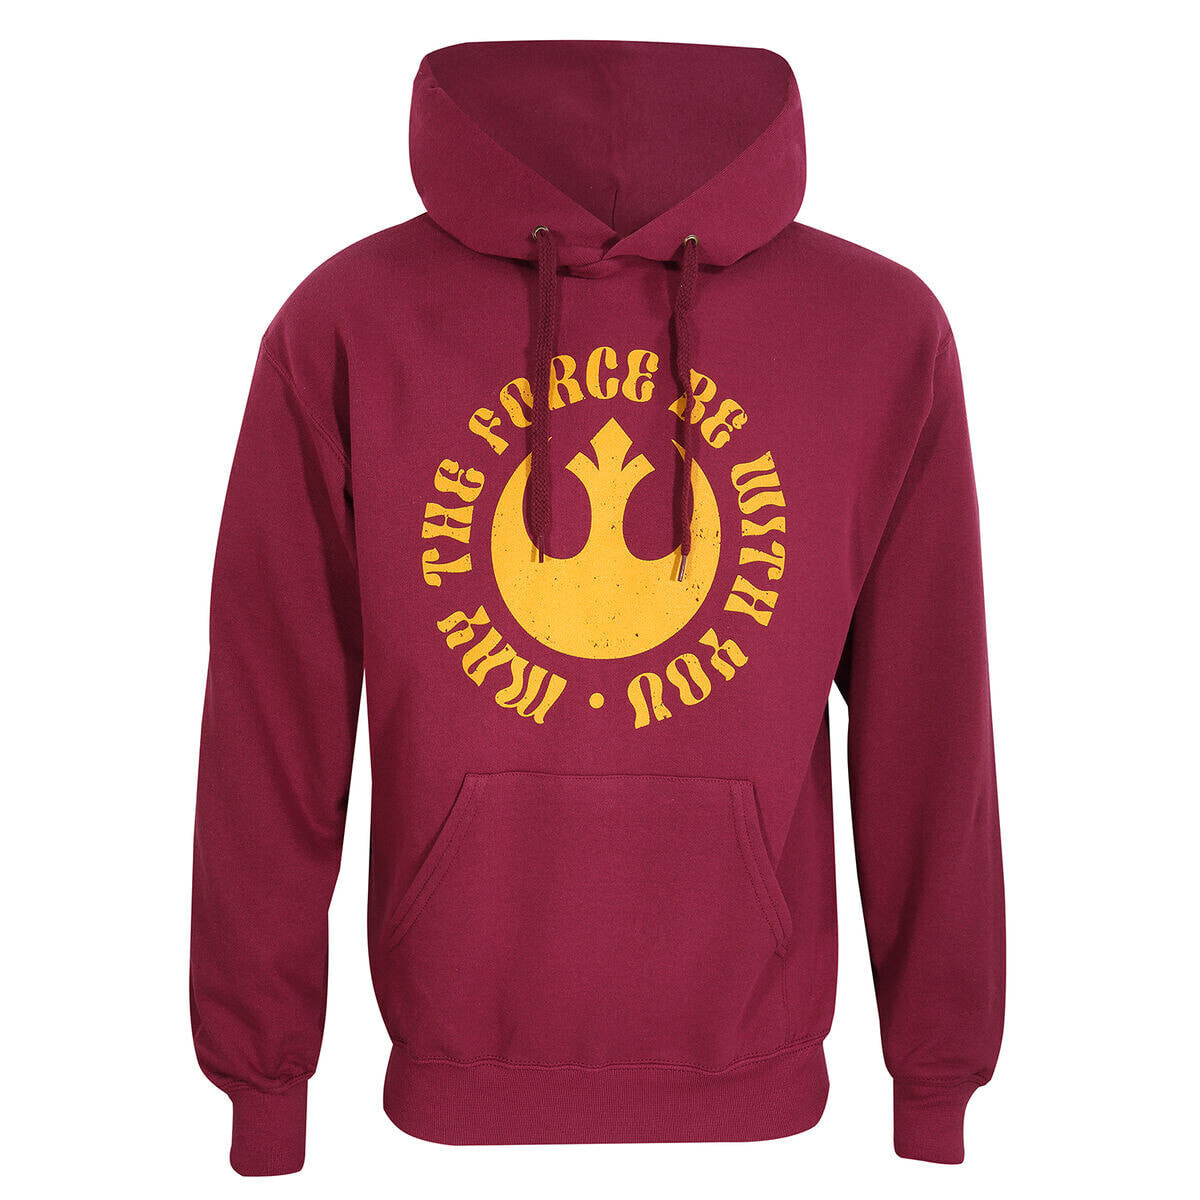 Unisex Hoodie Star Wars May The Force Be With You Burgundy